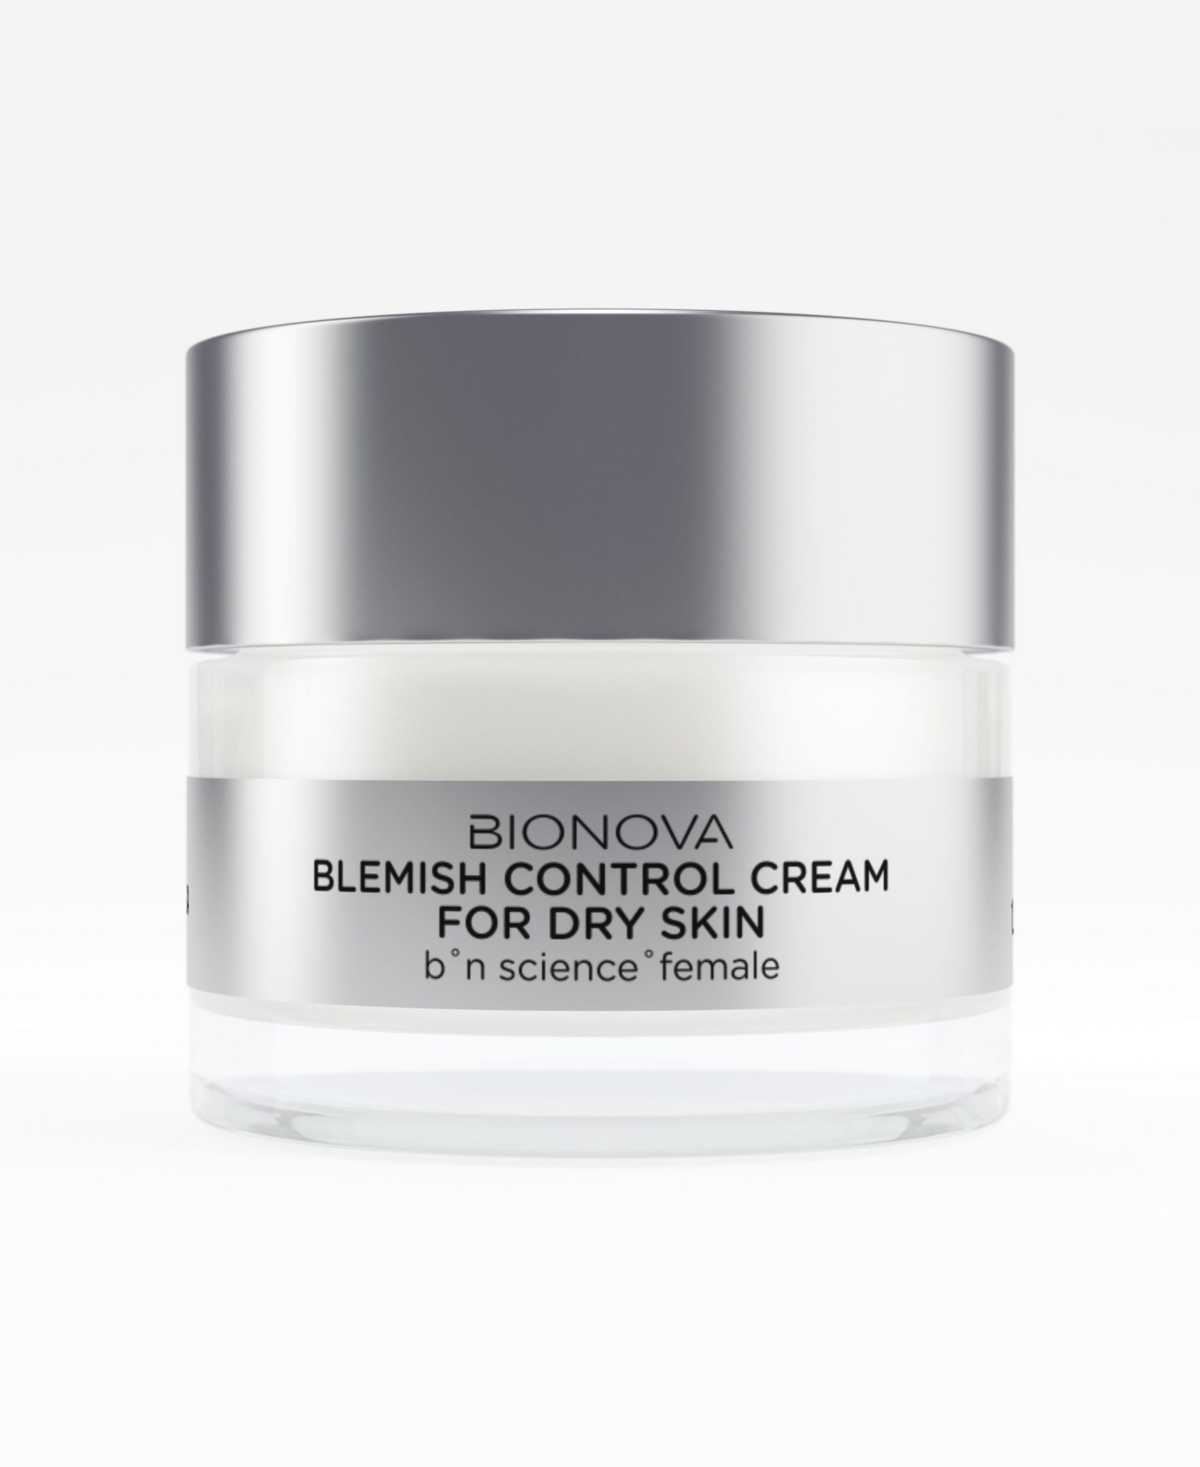 Blemish Control Cream For Dry Skin - Off-white